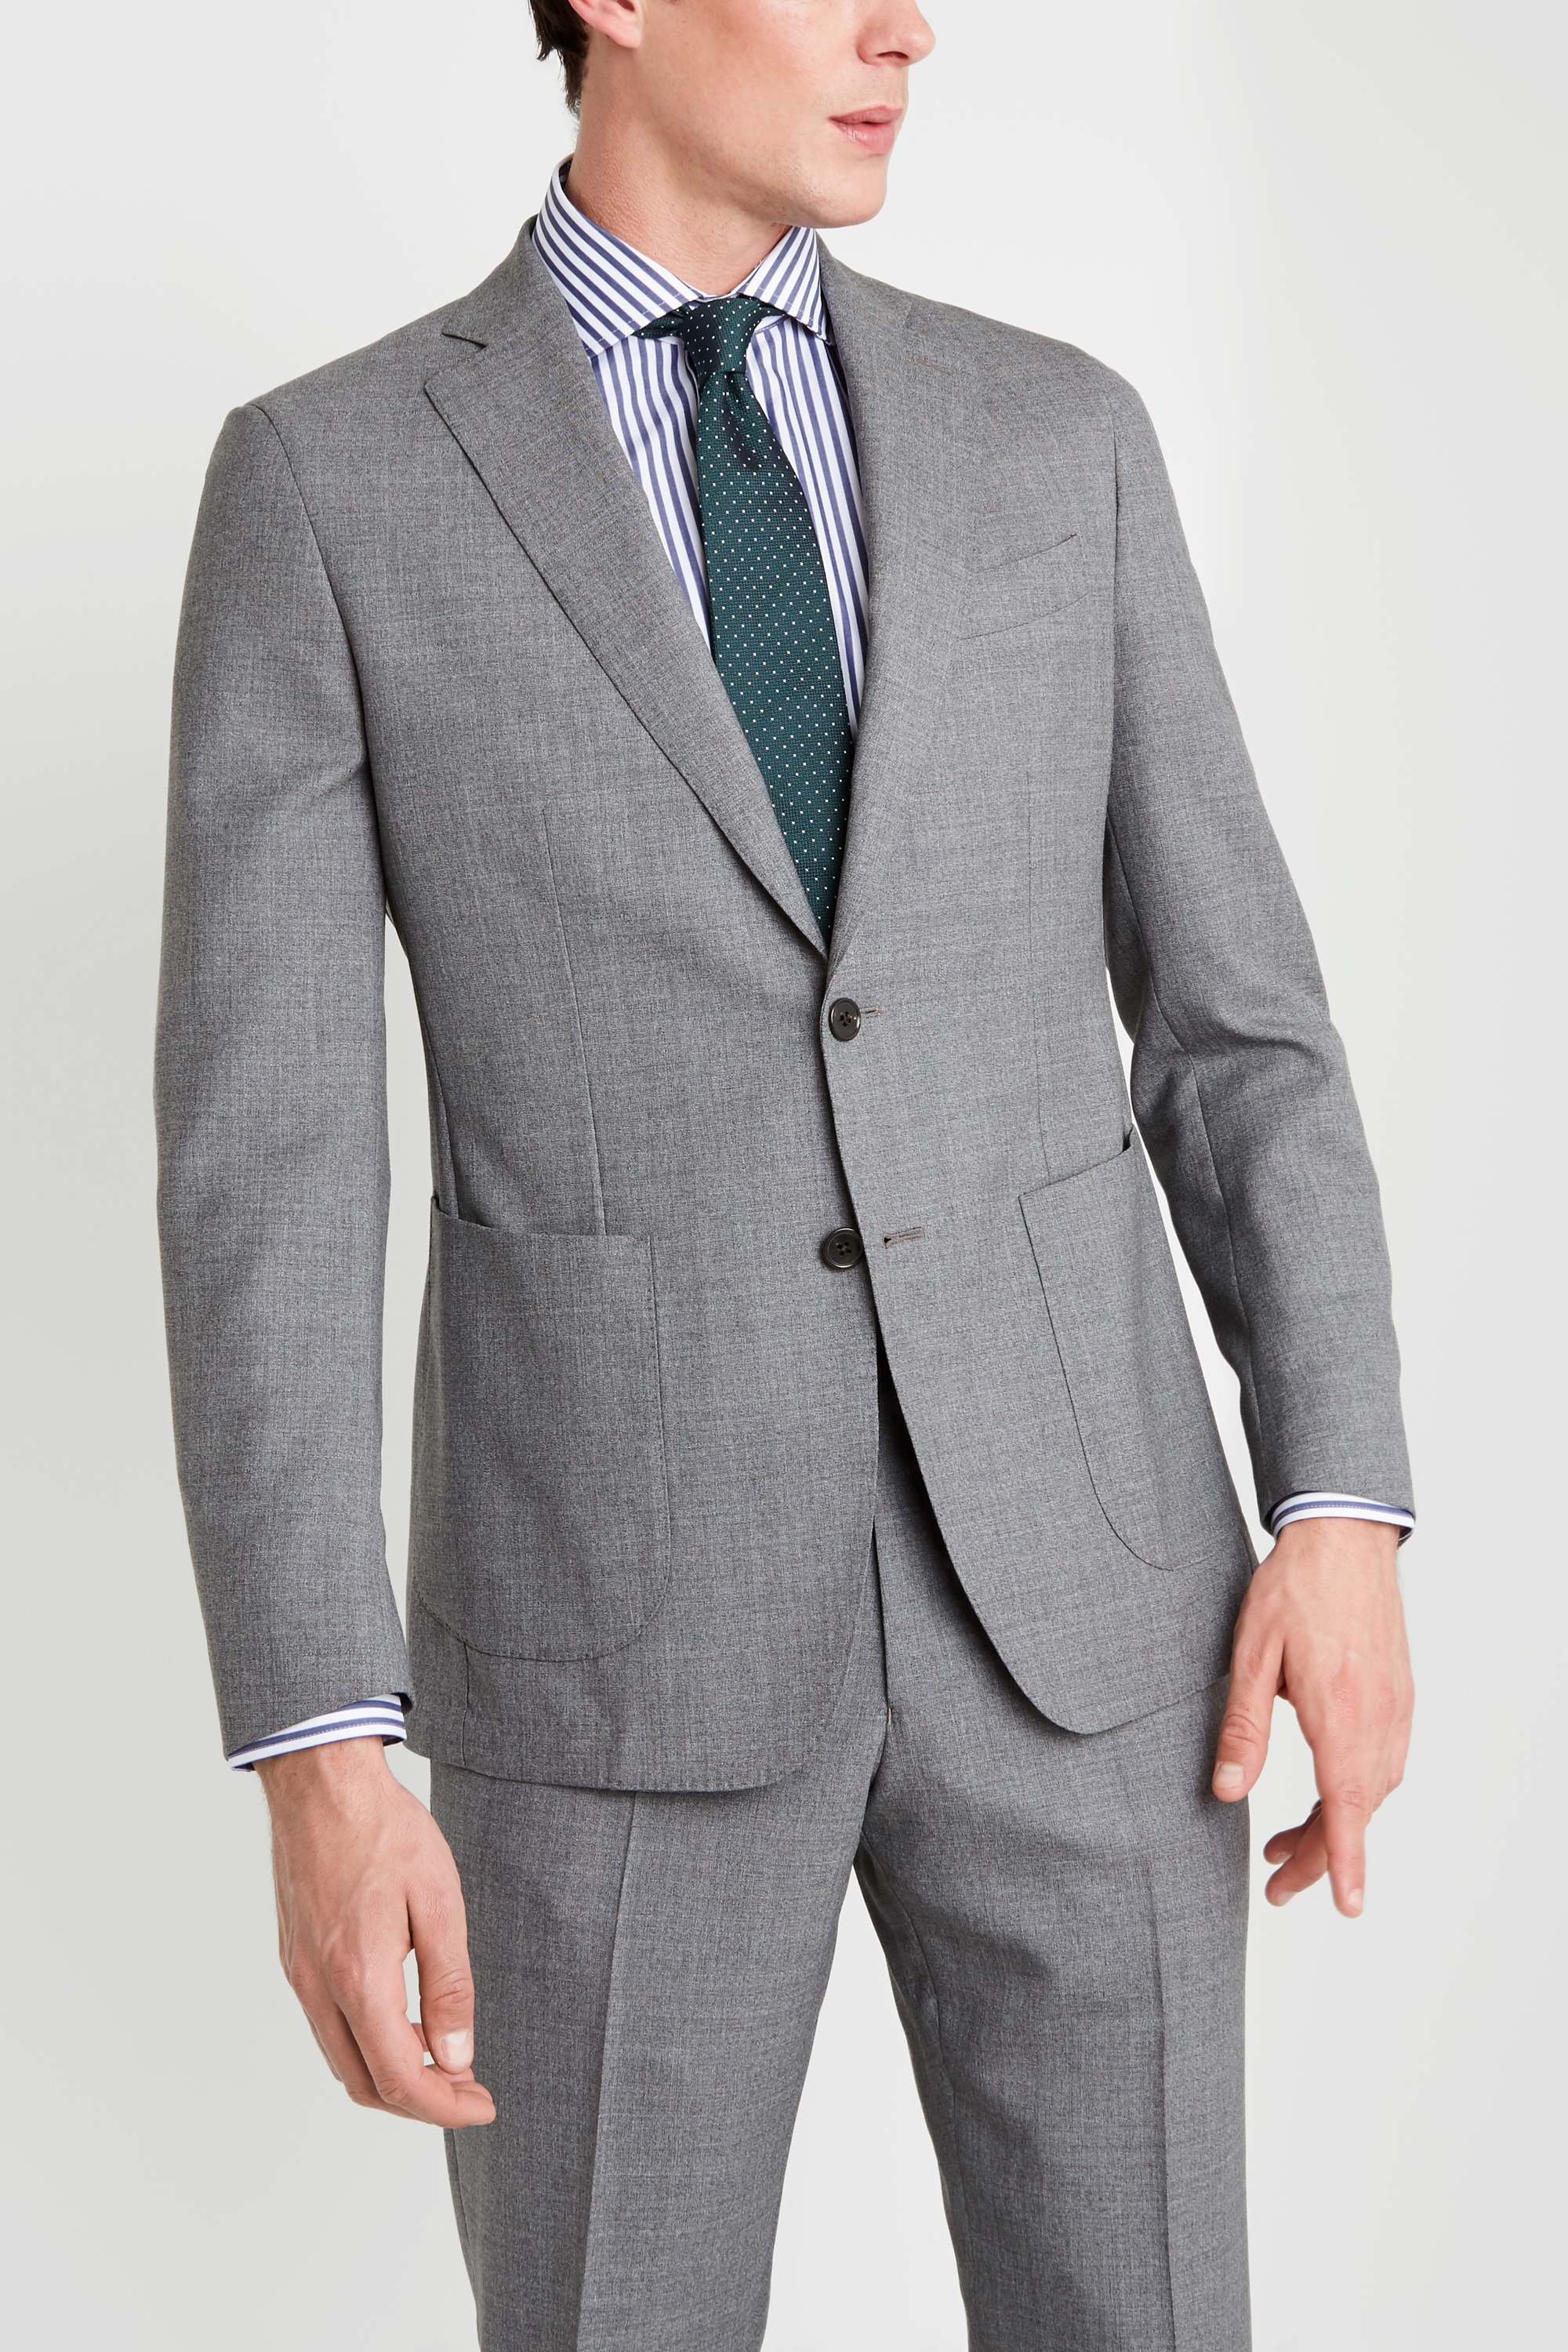 Savoy Taylors Guild Tailored Fit Grey Jacket